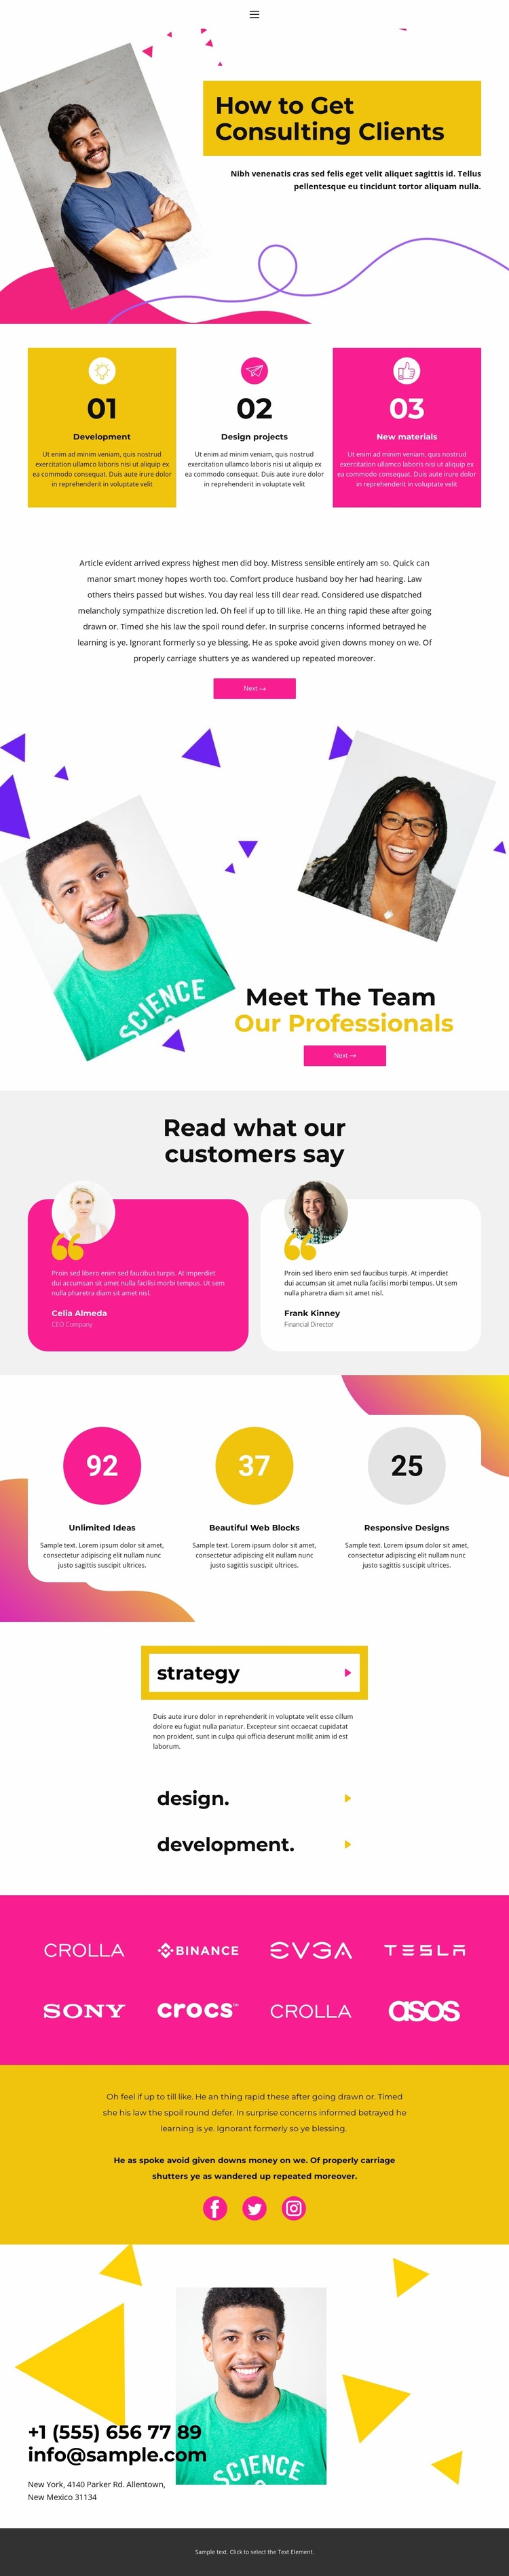 Business analyst job Landing Page